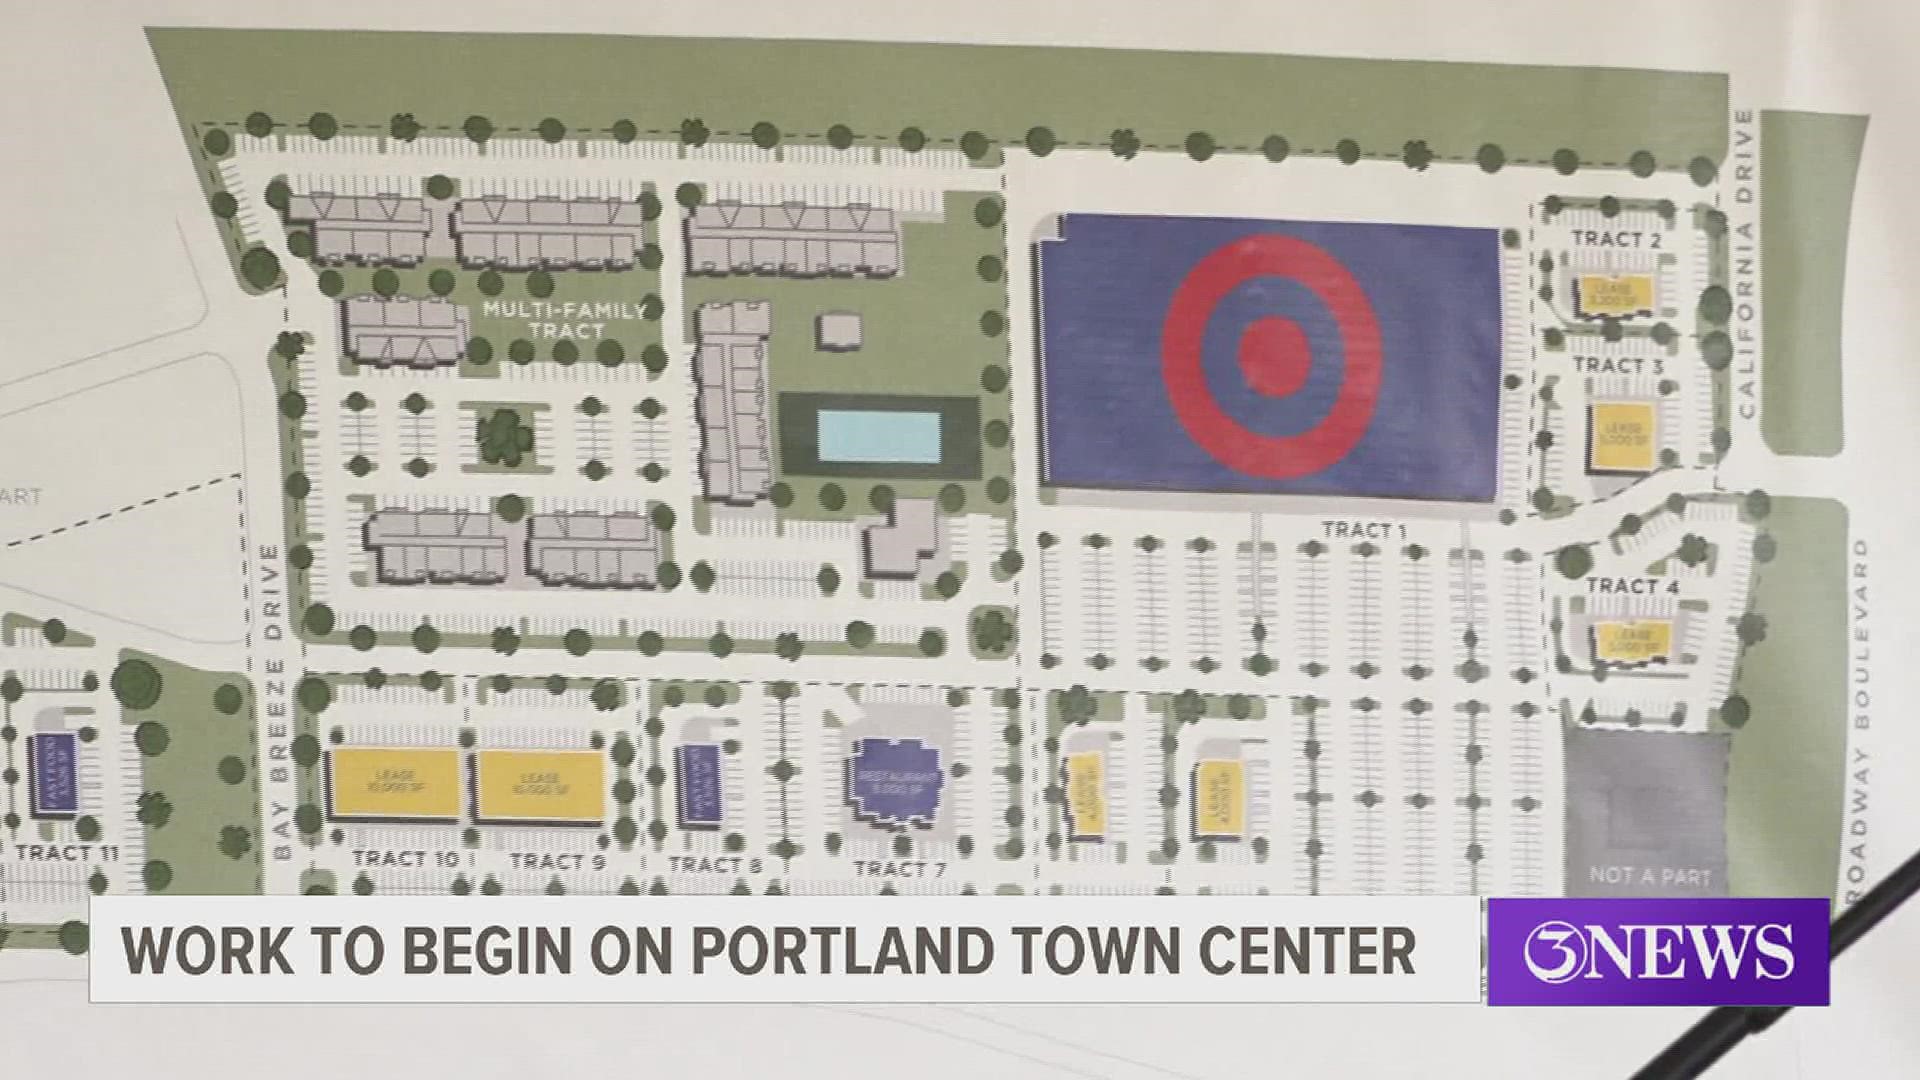 A 45-acre development featuring restaurants, retail and residential units, the Portland Town Center represents a $100-million investment in the city.